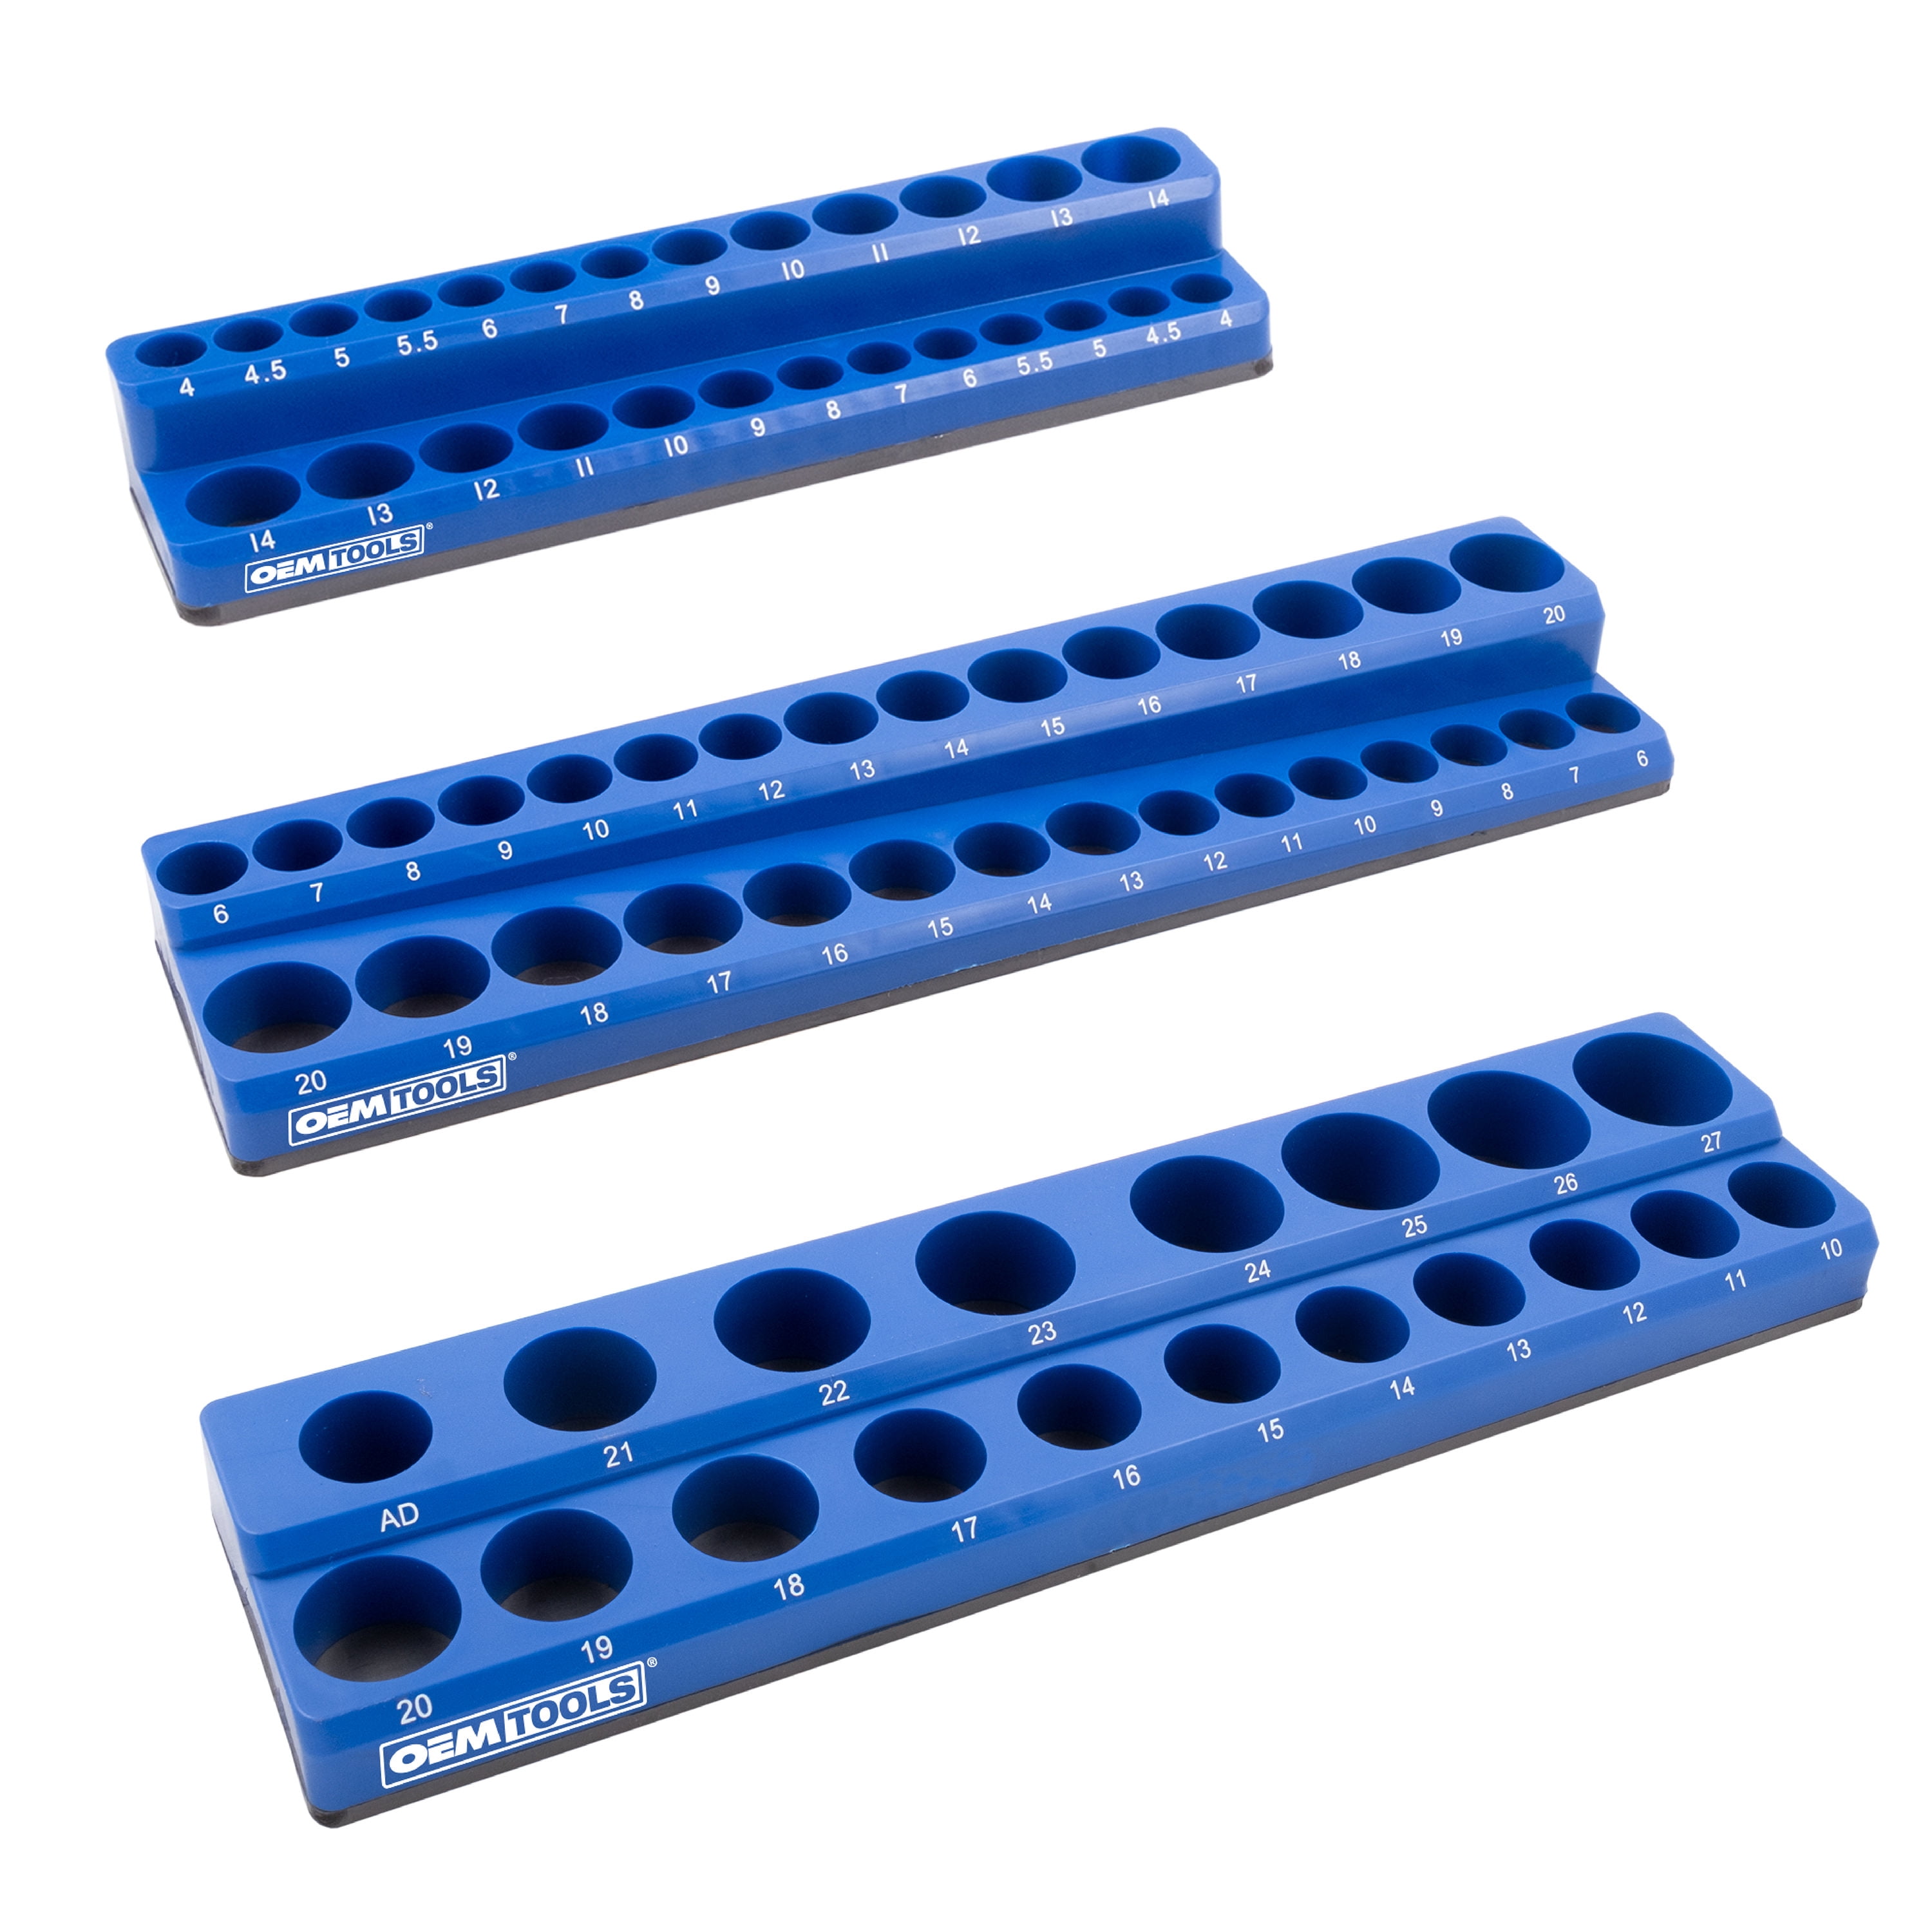 and 1/2 Inch Shallow and Deep Socket Holder Tool Box Organizer OEMTOOLS 22484 3 Piece Magnetic Socket Organizer Holds 68 SAE Sockets Red 1/4 Inch 3/8 Inch 